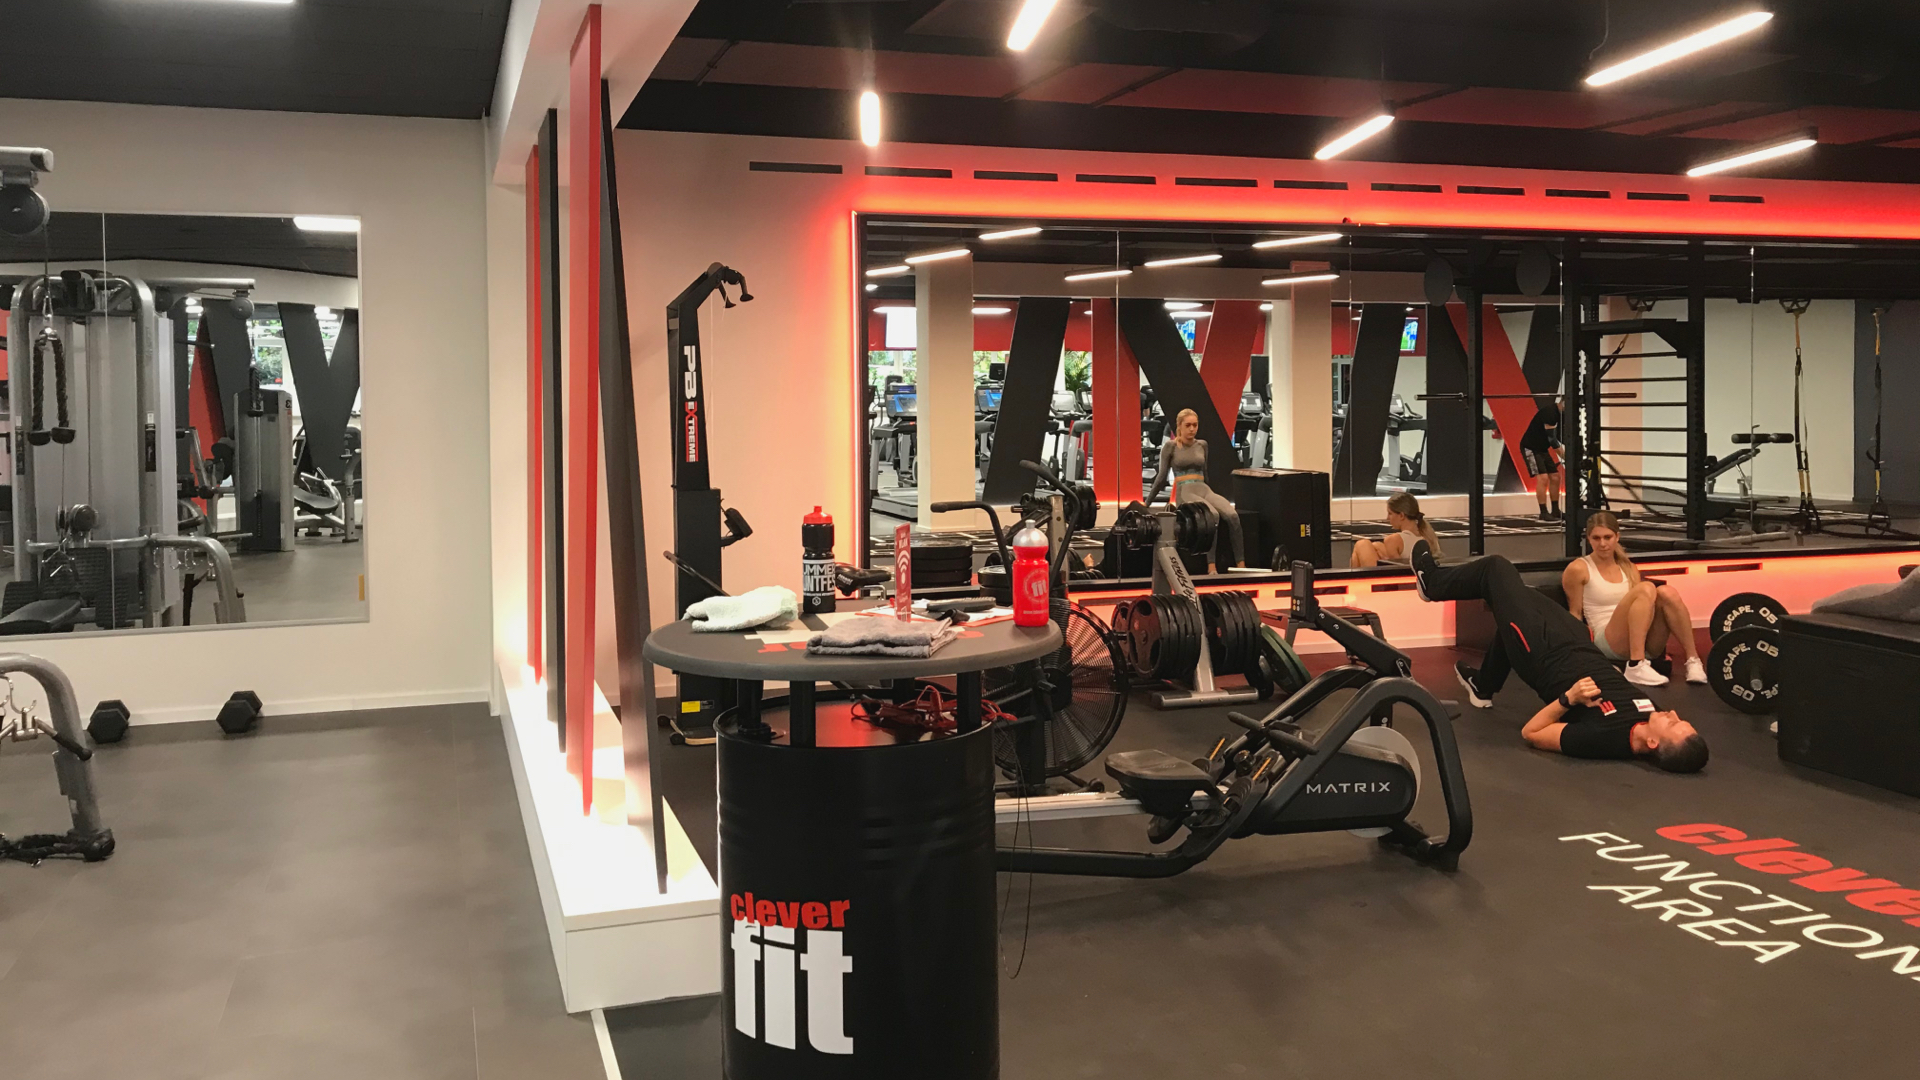 Cleverfit: A Loxone-automated gym